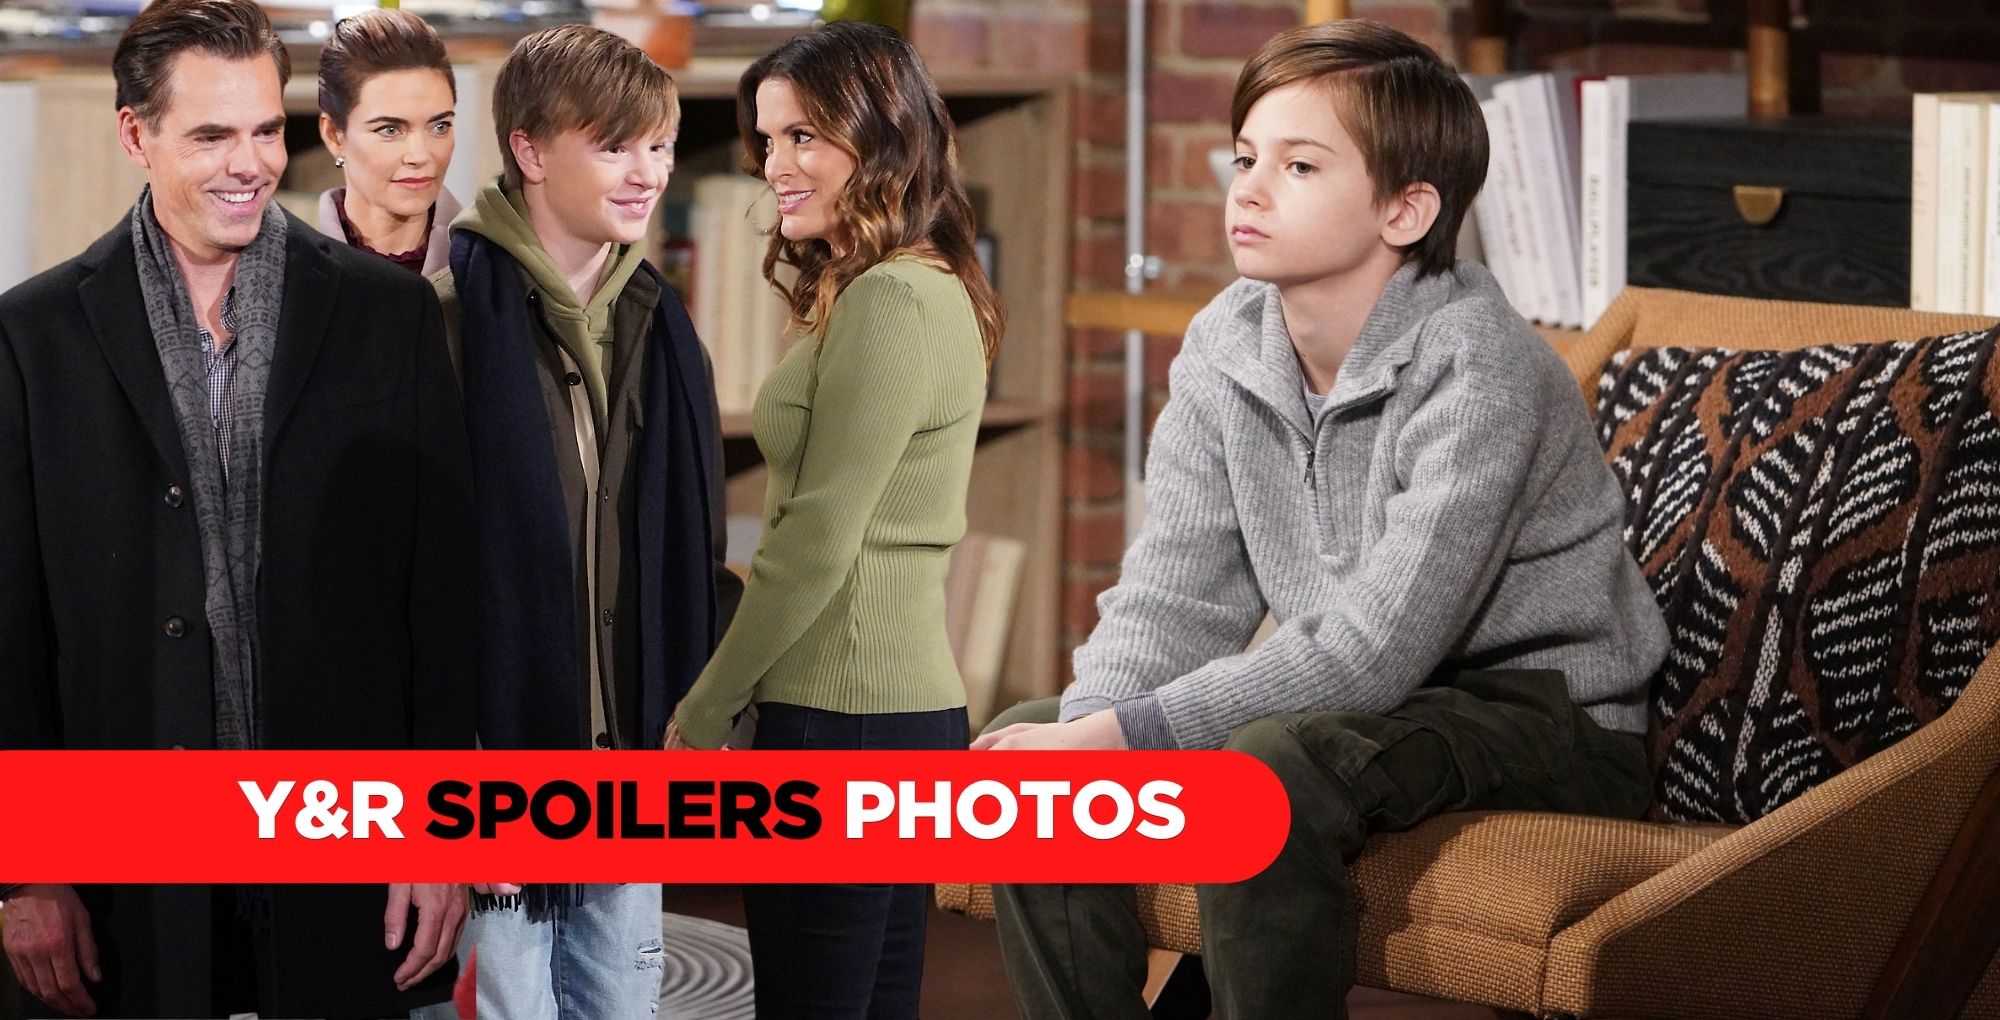 y&r spoilers photos collage of billy victoria johnny chelsea and connor